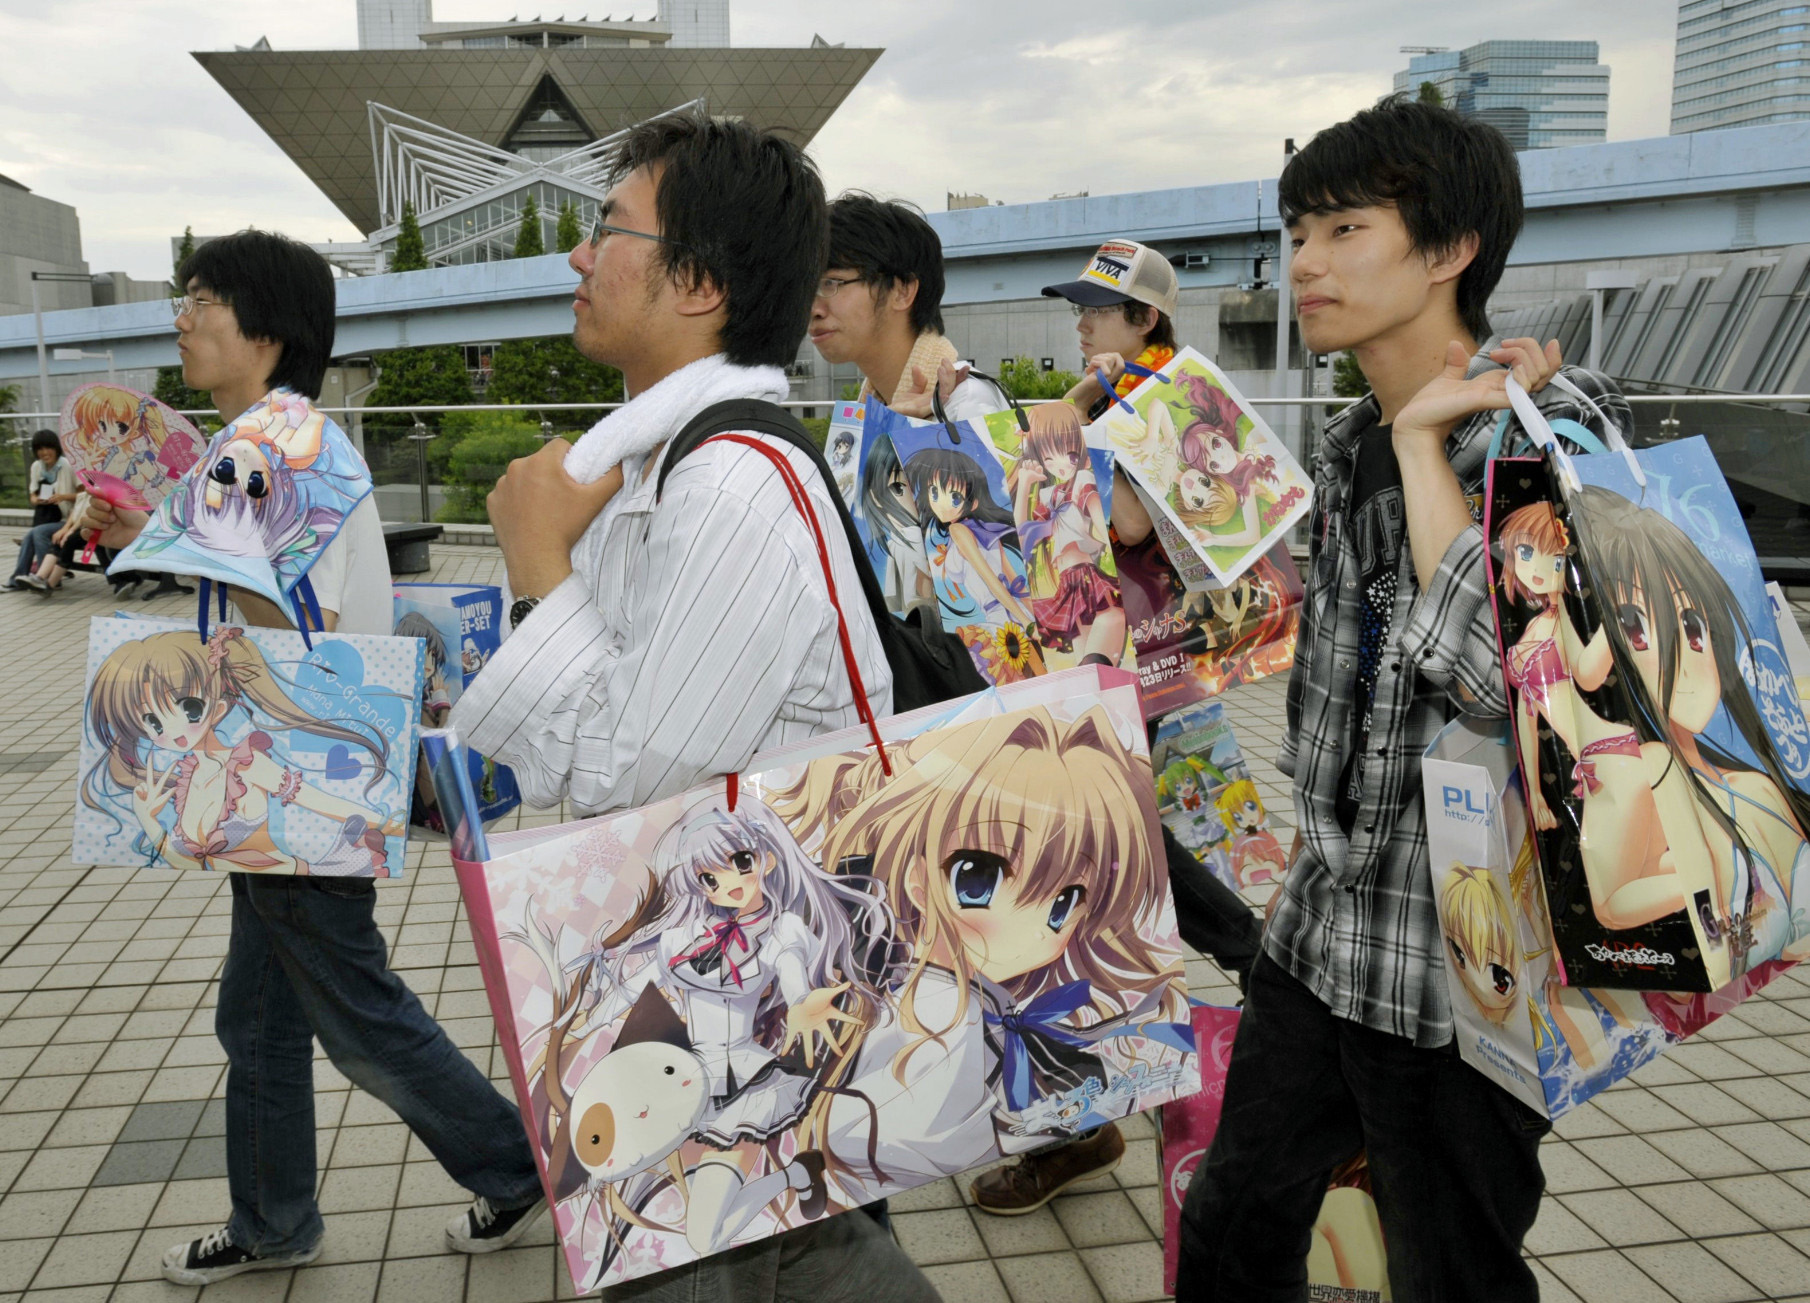 Participants in the Comic Market are seen carrying paper bags bearing images of various characters in animated films and games at the Tokyo Big Sight on Aug. 14, 2009. | KYODO